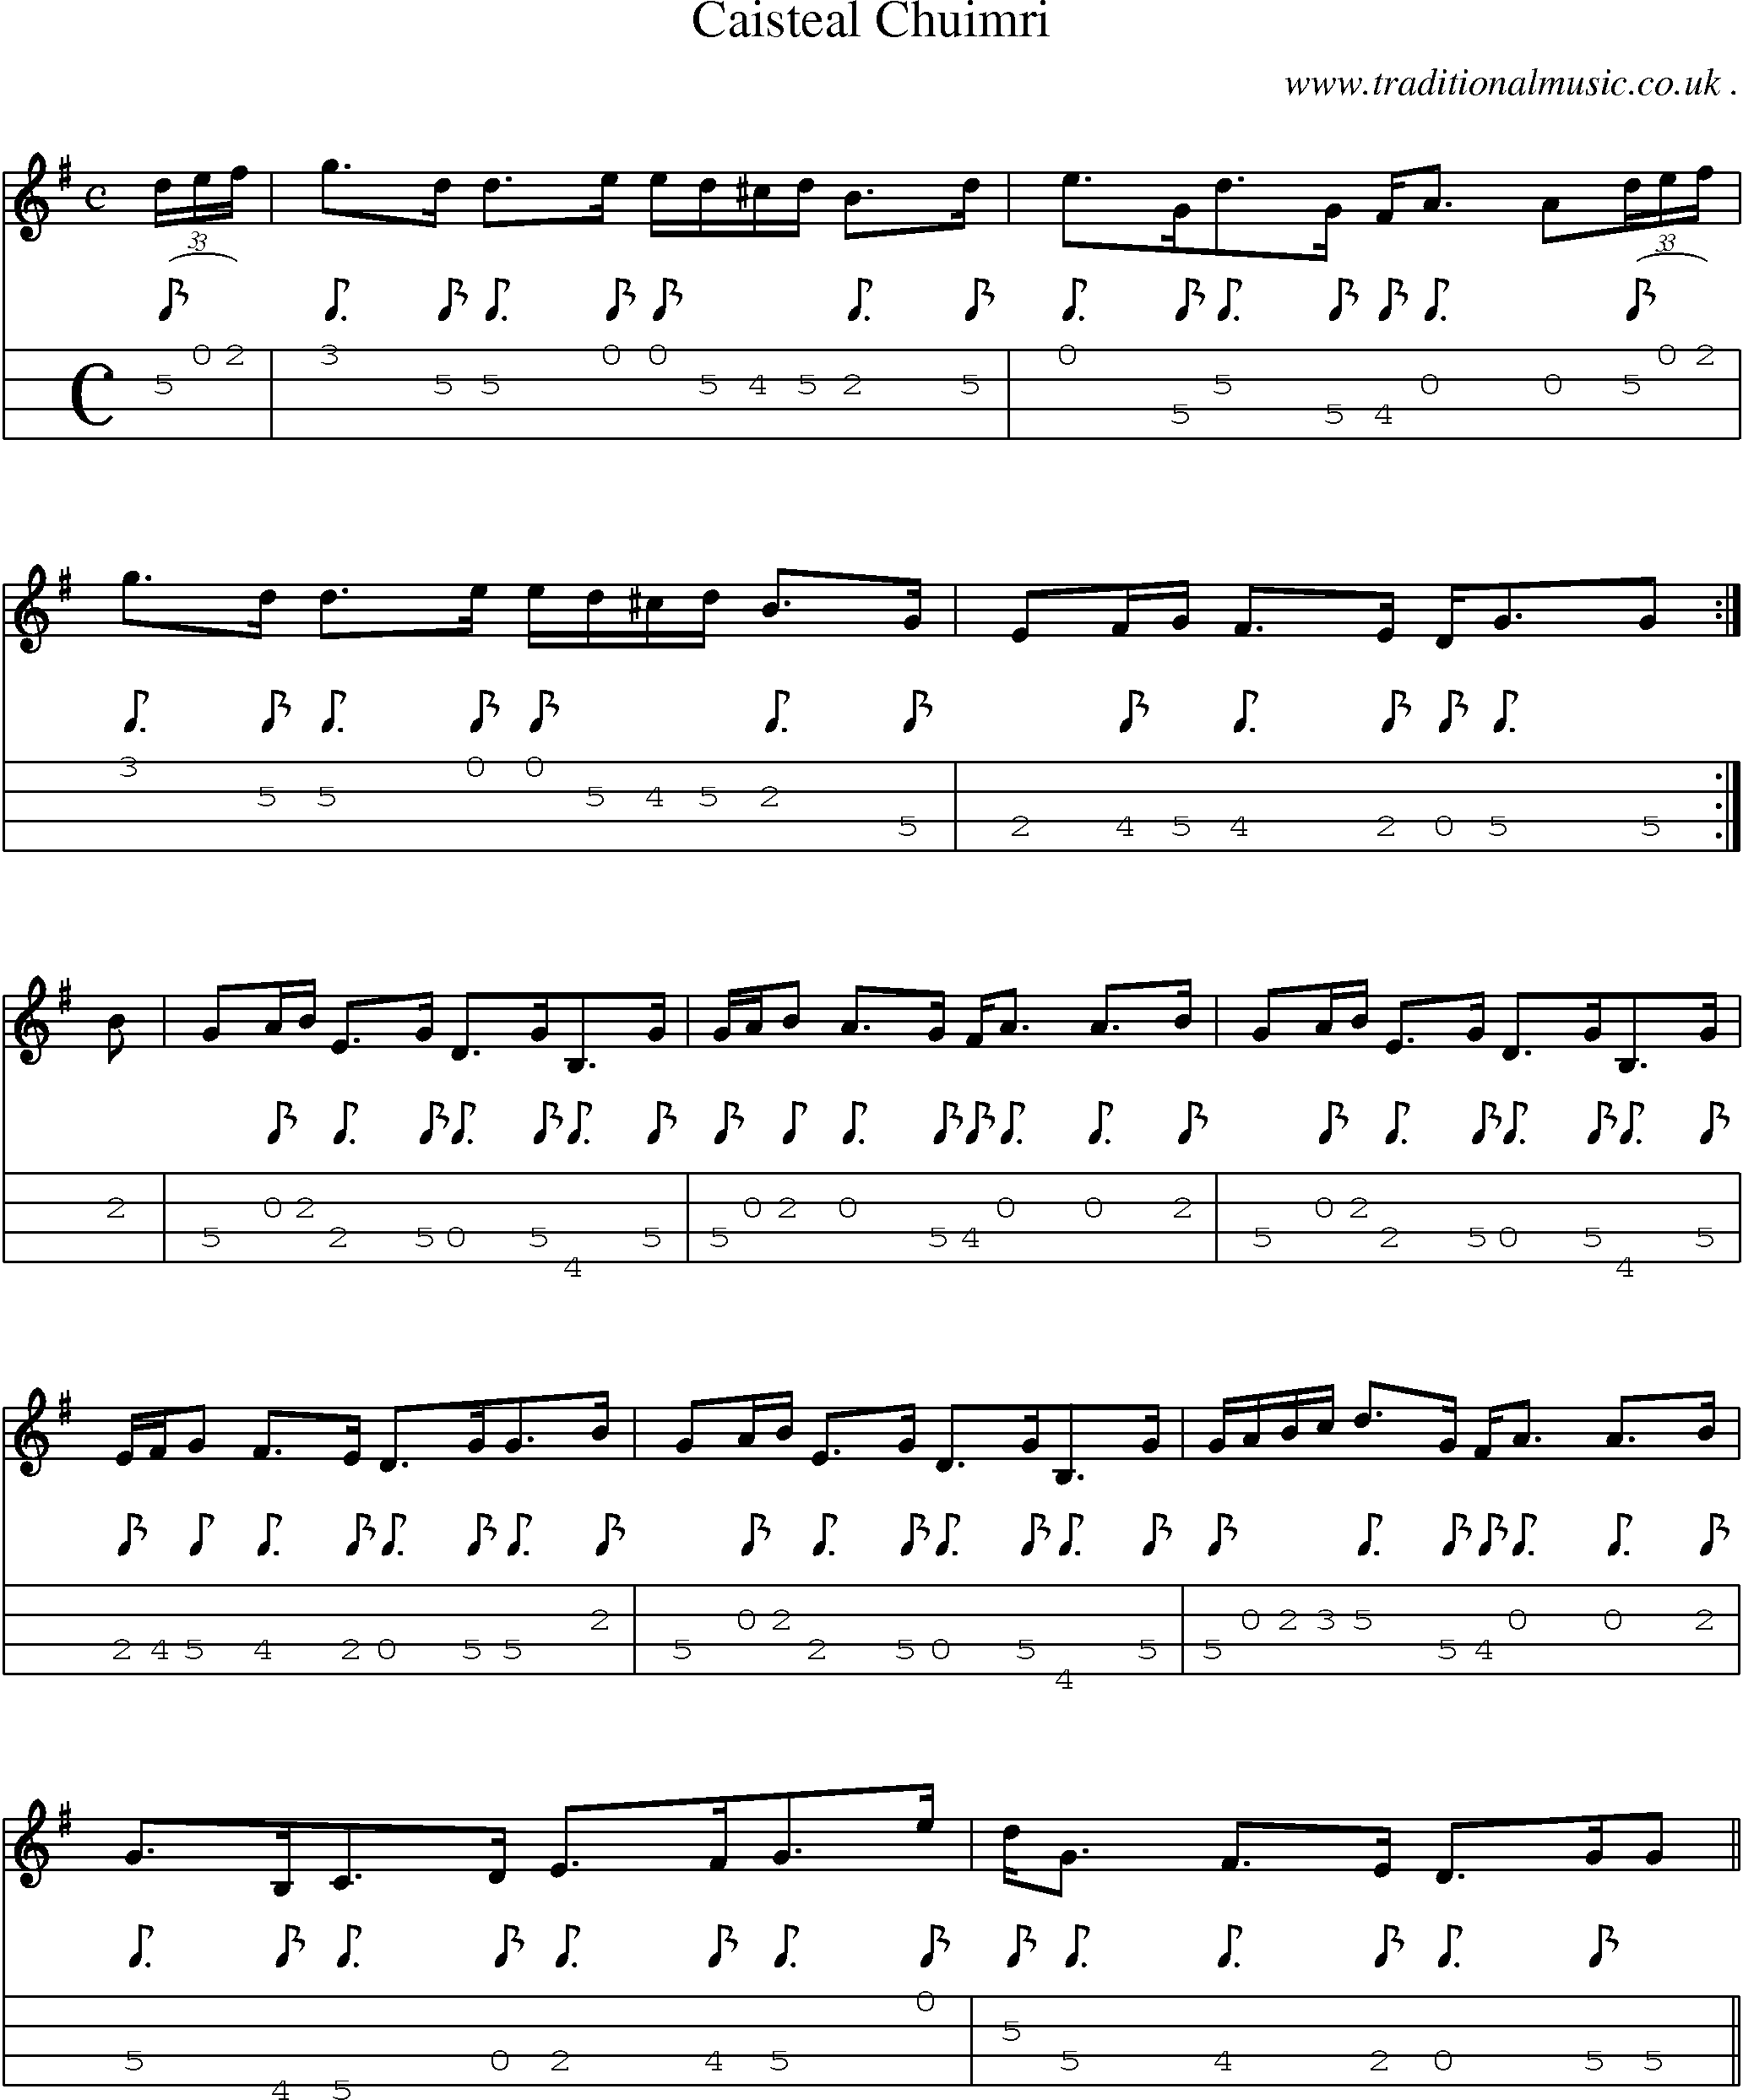 Sheet-music  score, Chords and Mandolin Tabs for Caisteal Chuimri